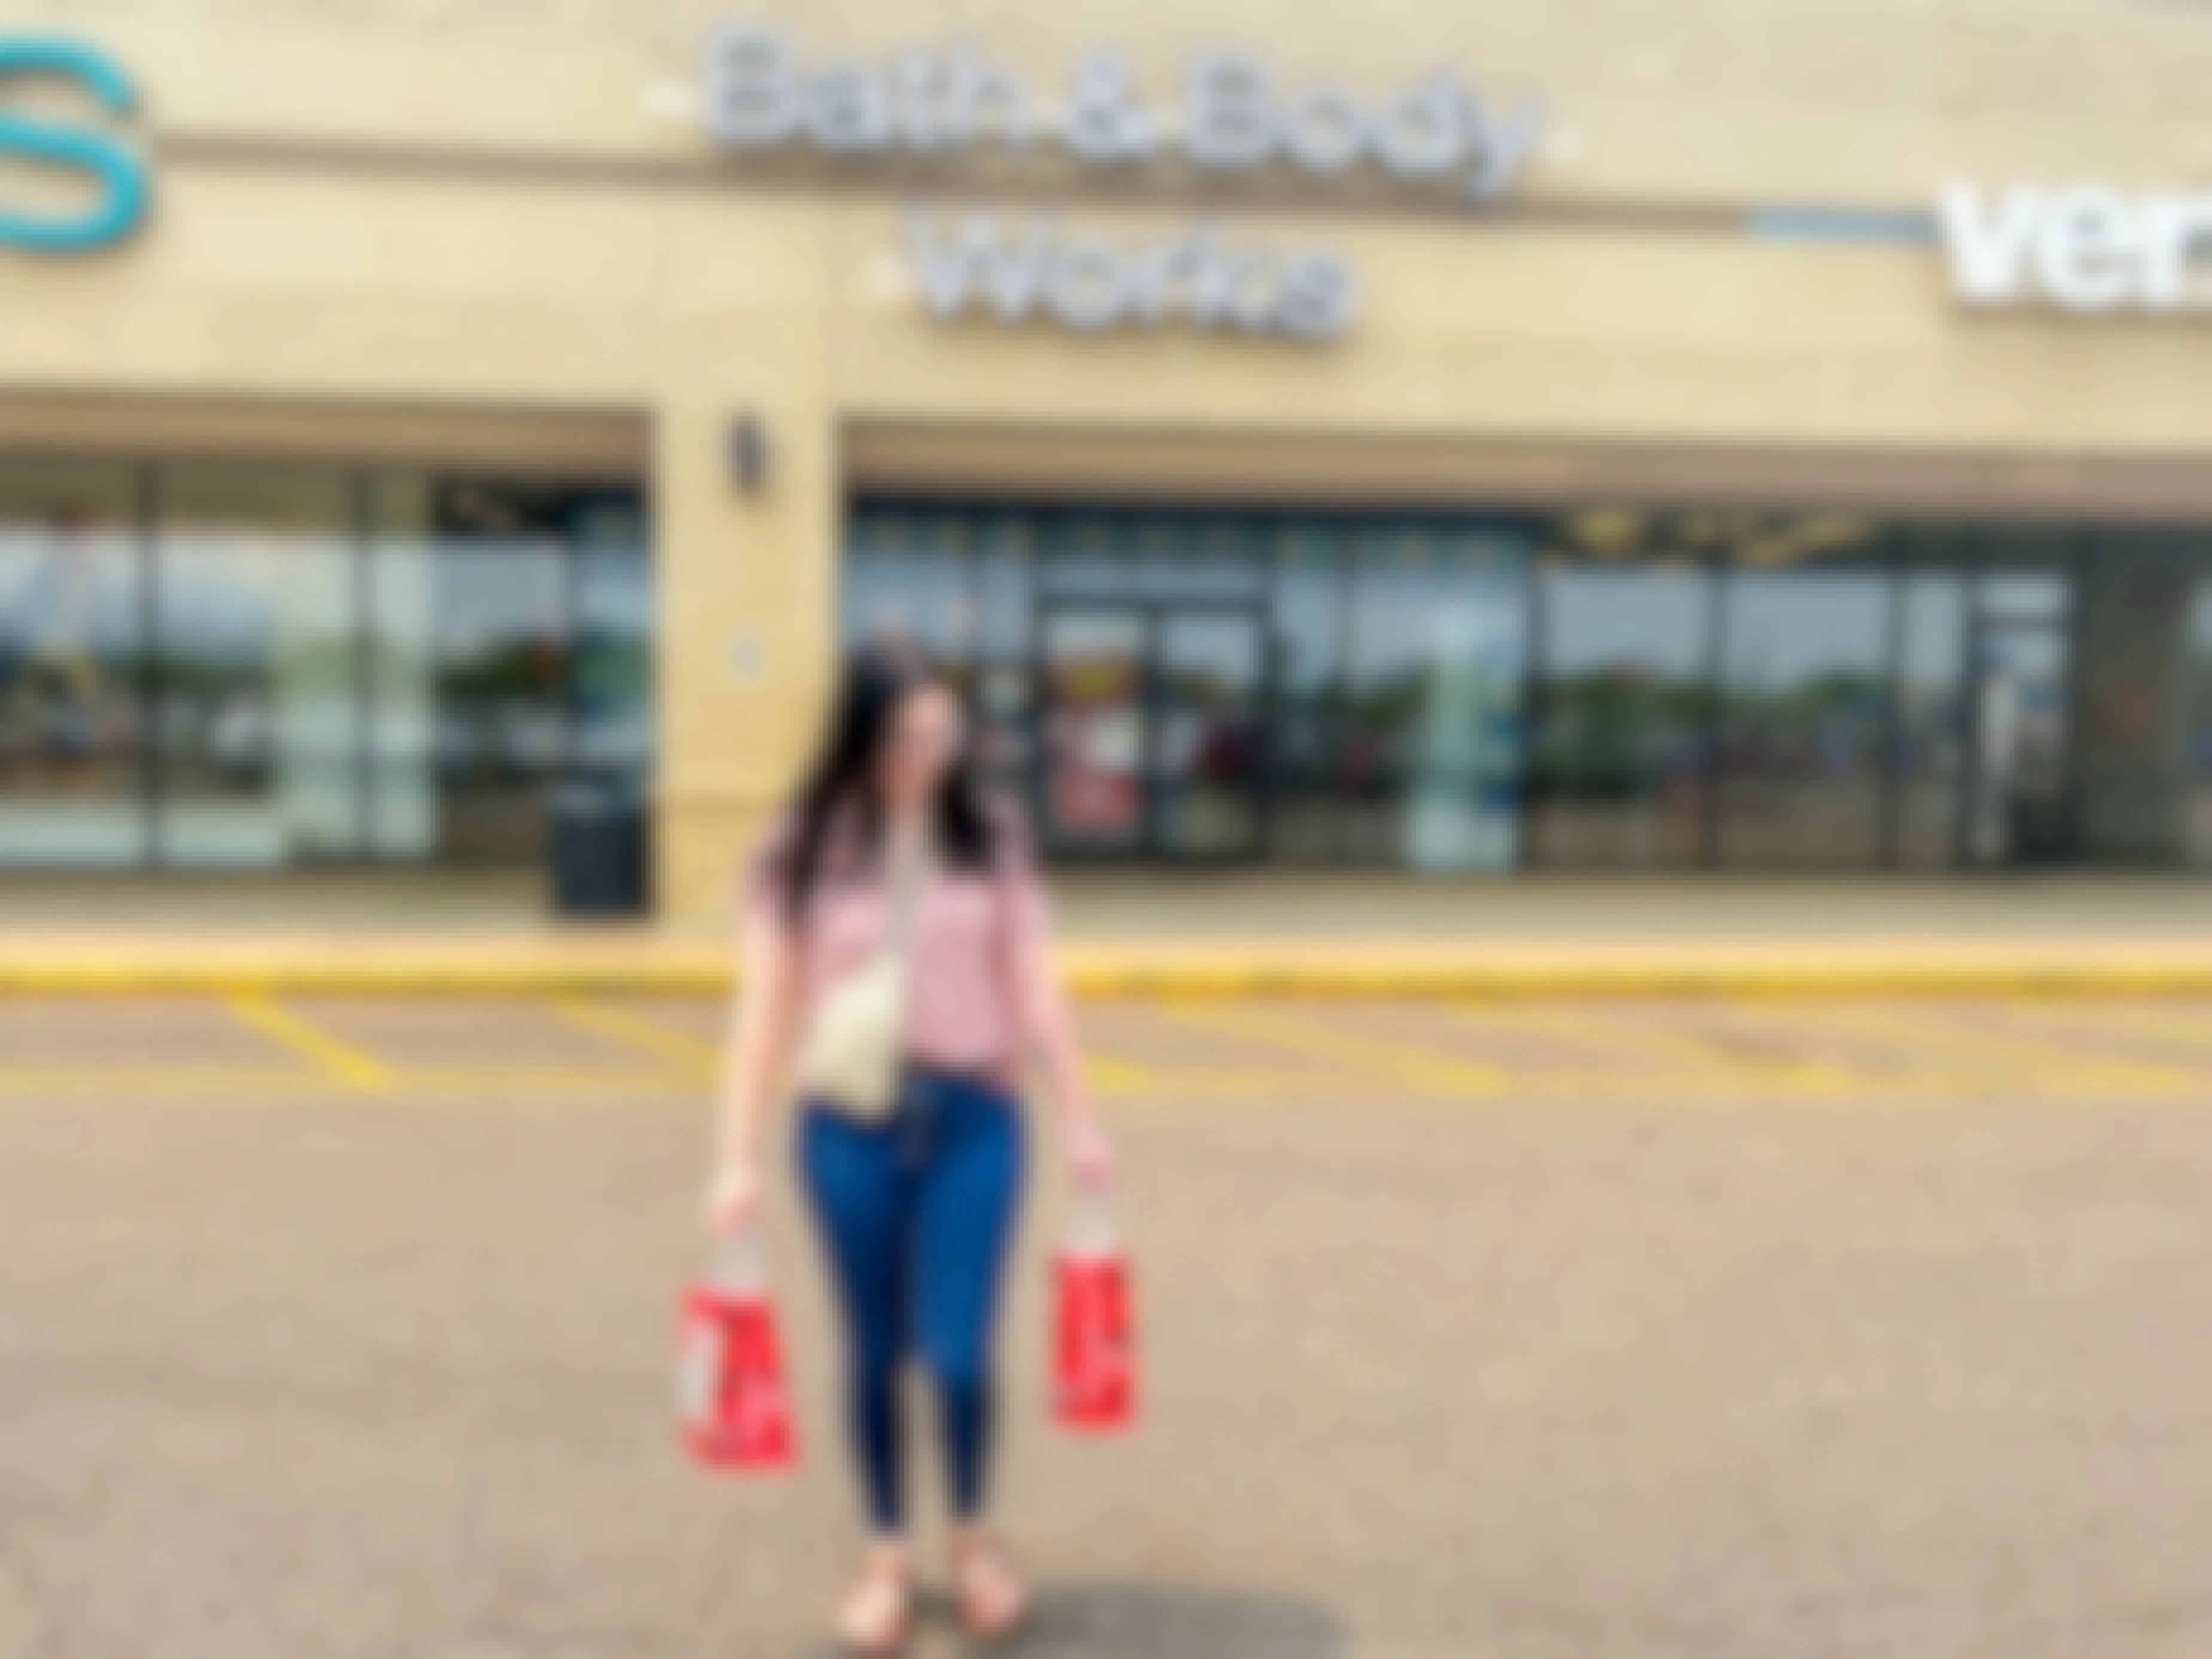 a person walking out of bath & body smiling while holding shopping bags